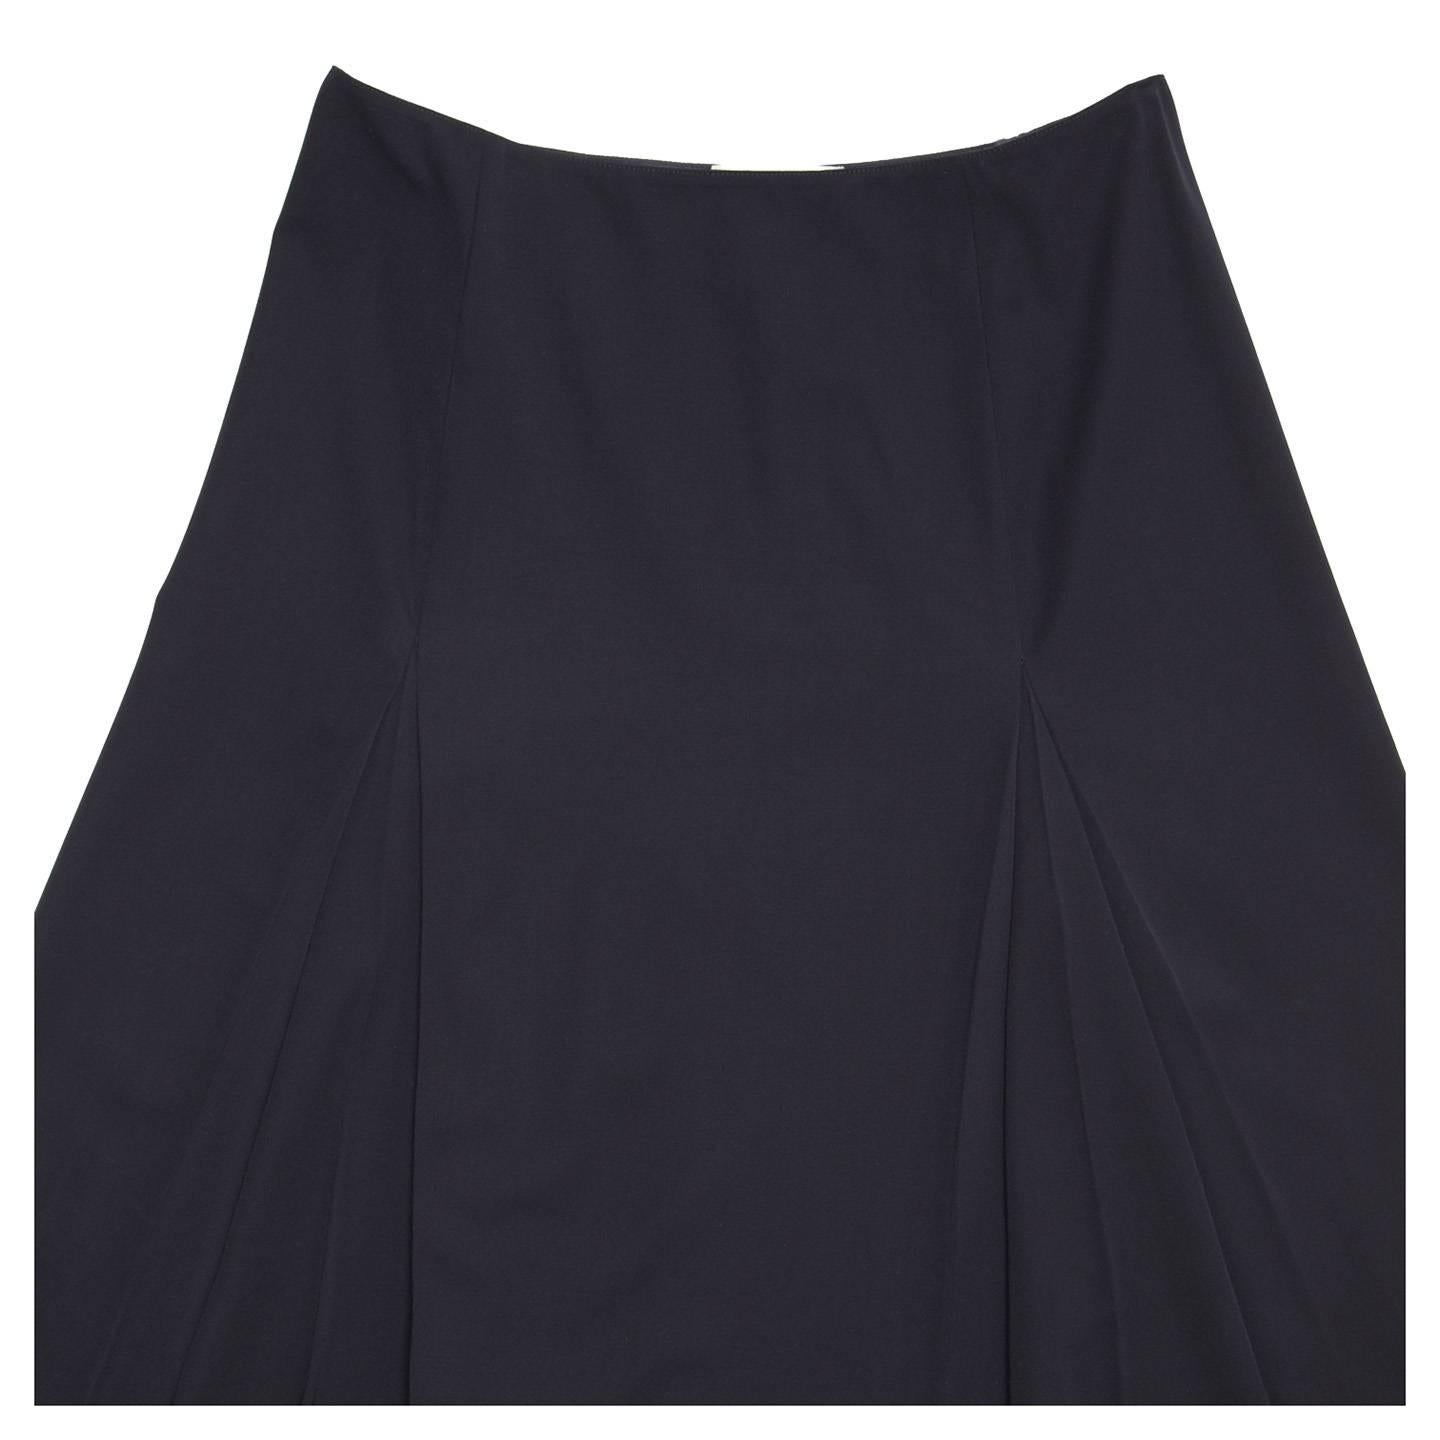 Prada Midnight Blue Wool Skirt In Good Condition For Sale In Brooklyn, NY